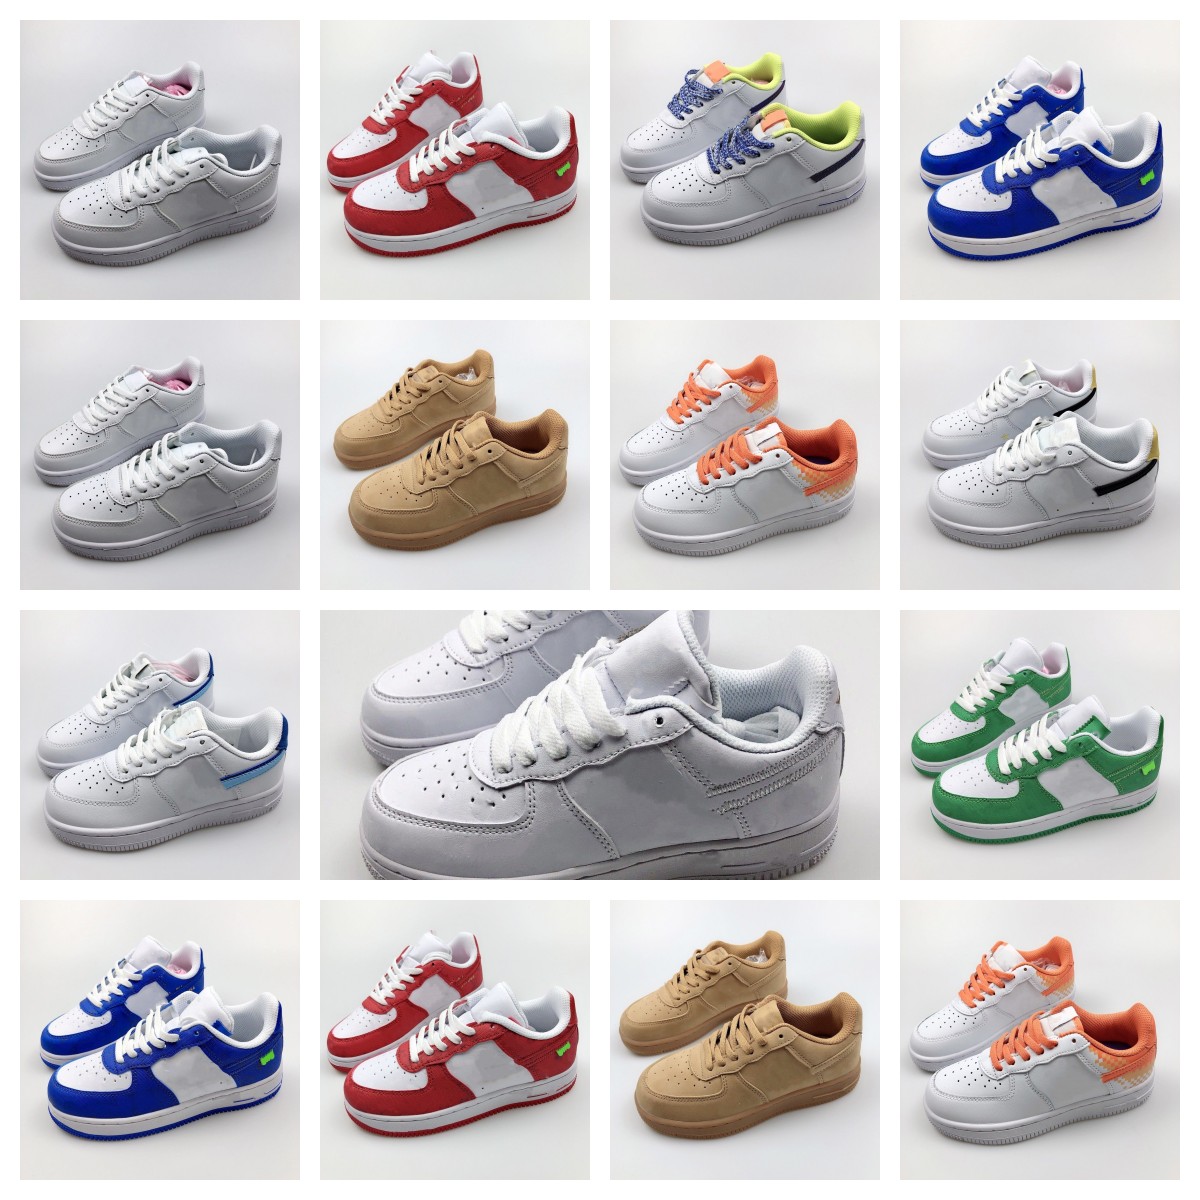 

Designer Kids shoes Jumpman 1s Sneakers 1 Running Shoes Children sneaker Casual Breathable shoes baby Sport Shoe Low Cut White Outdoor sports Trainers Sneakers 24-35, #7